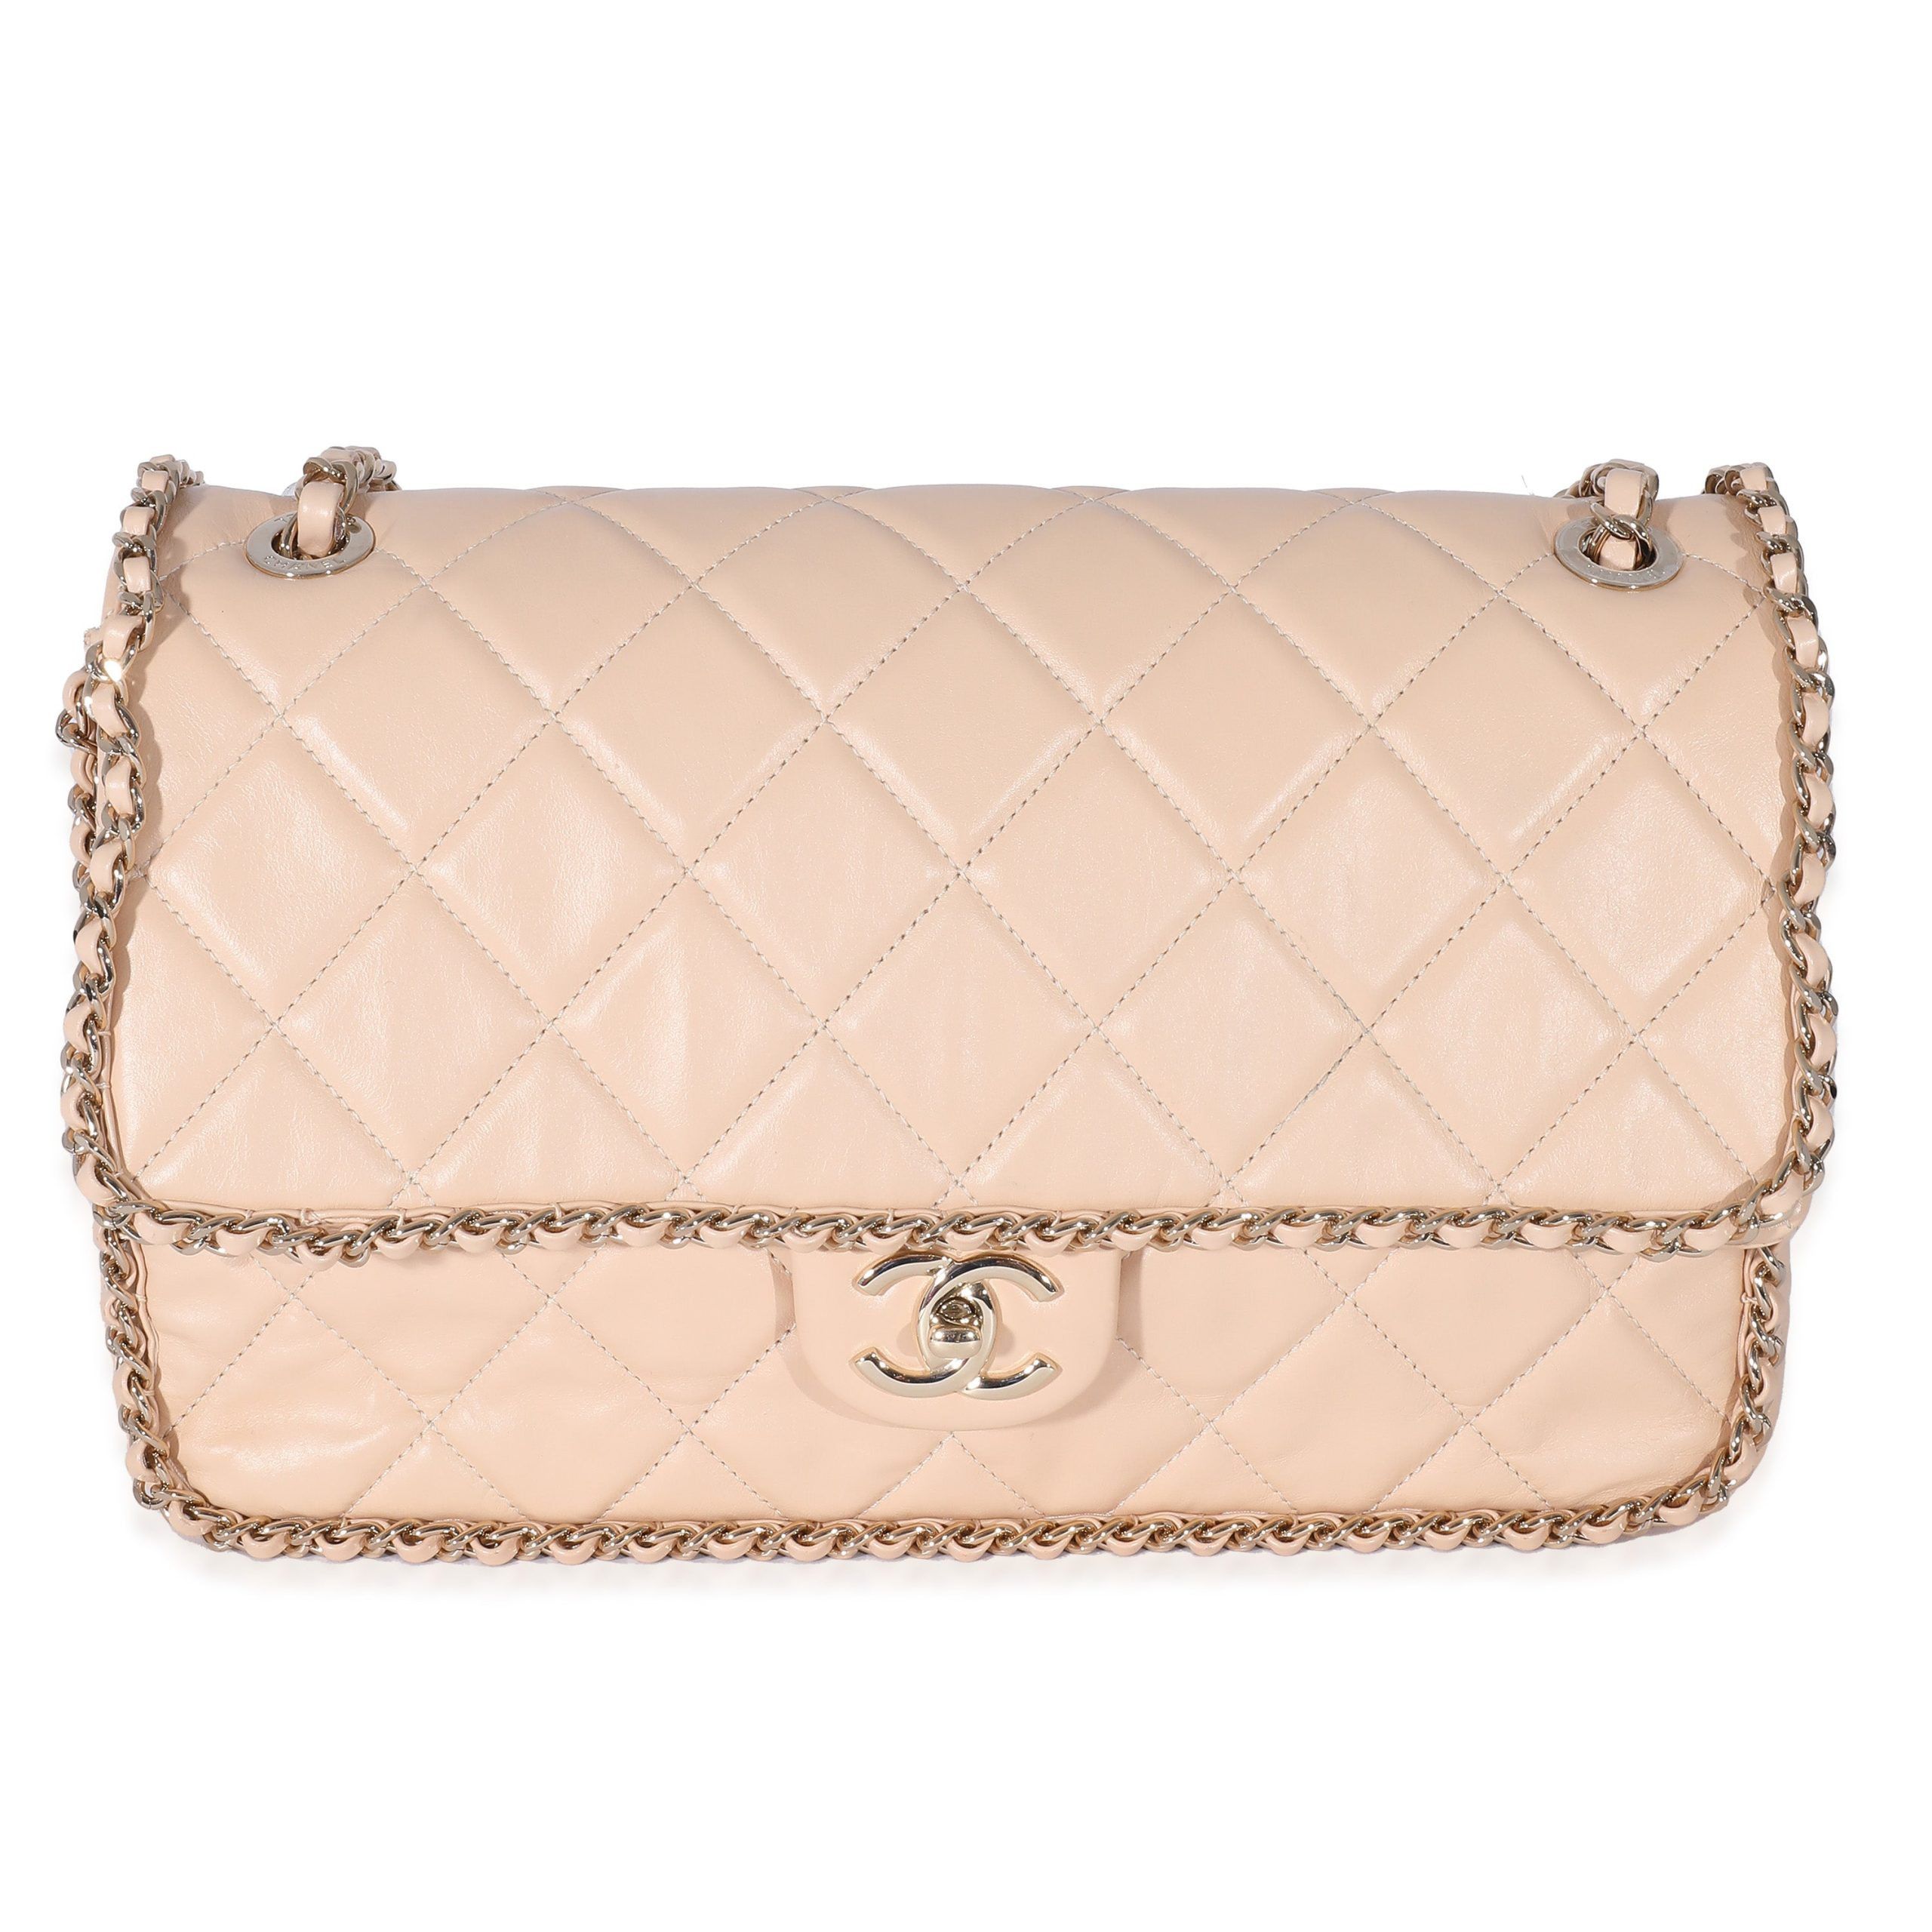 Chanel Chanel Beige Crumpled Calfskin Medium Chain All Over Flap Bag Size ONE SIZE - 1 Preview